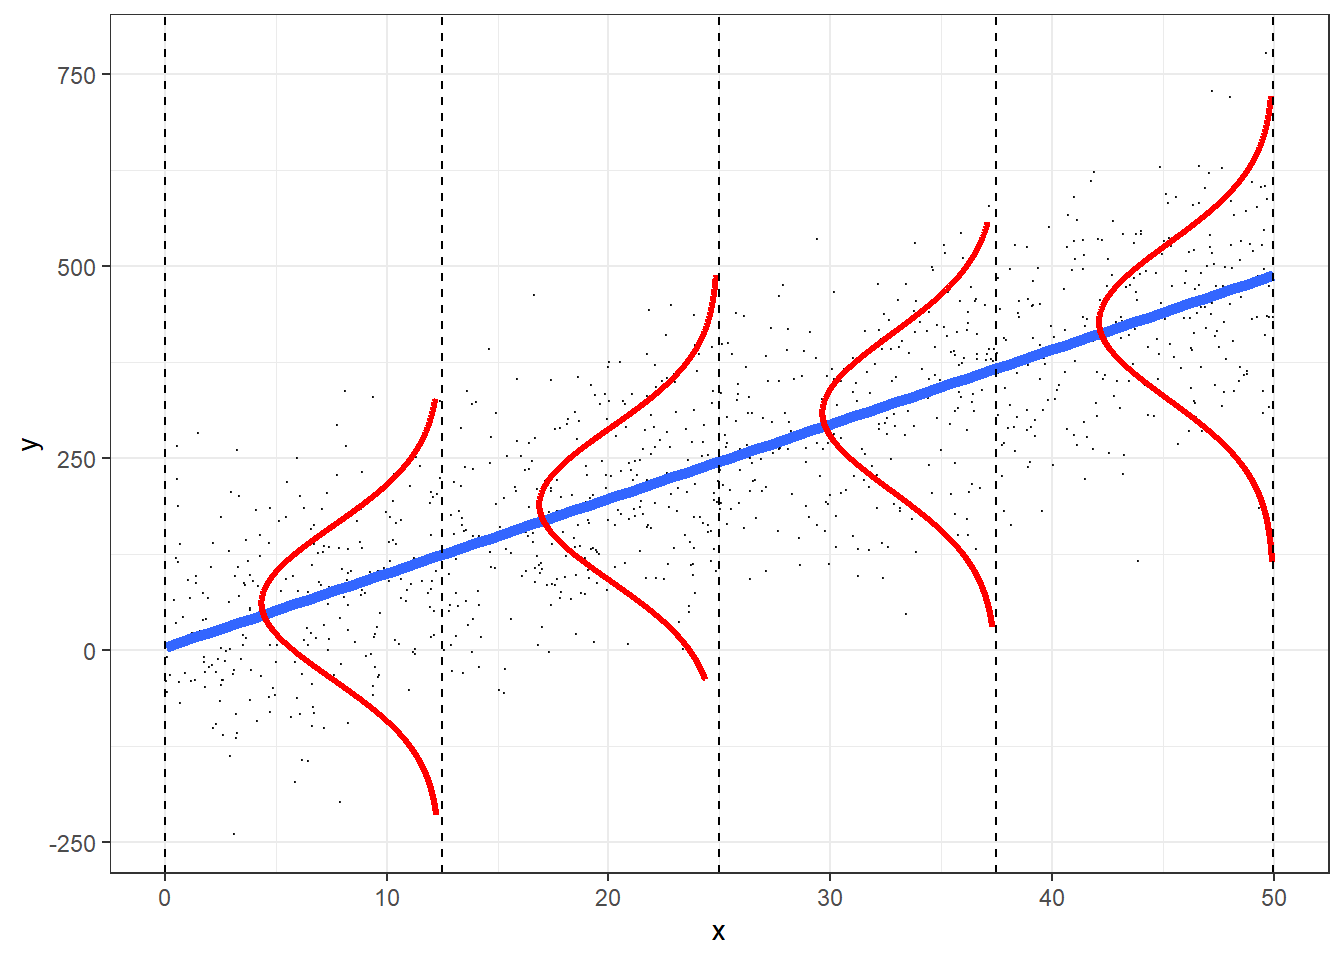 The role of the Normal distribution as a data-generating model. This figure was produced using modified code from an answer on stackoverflow by Roback & Legler (2021) (https://bookdown.org/roback/bookdown-bysh/).